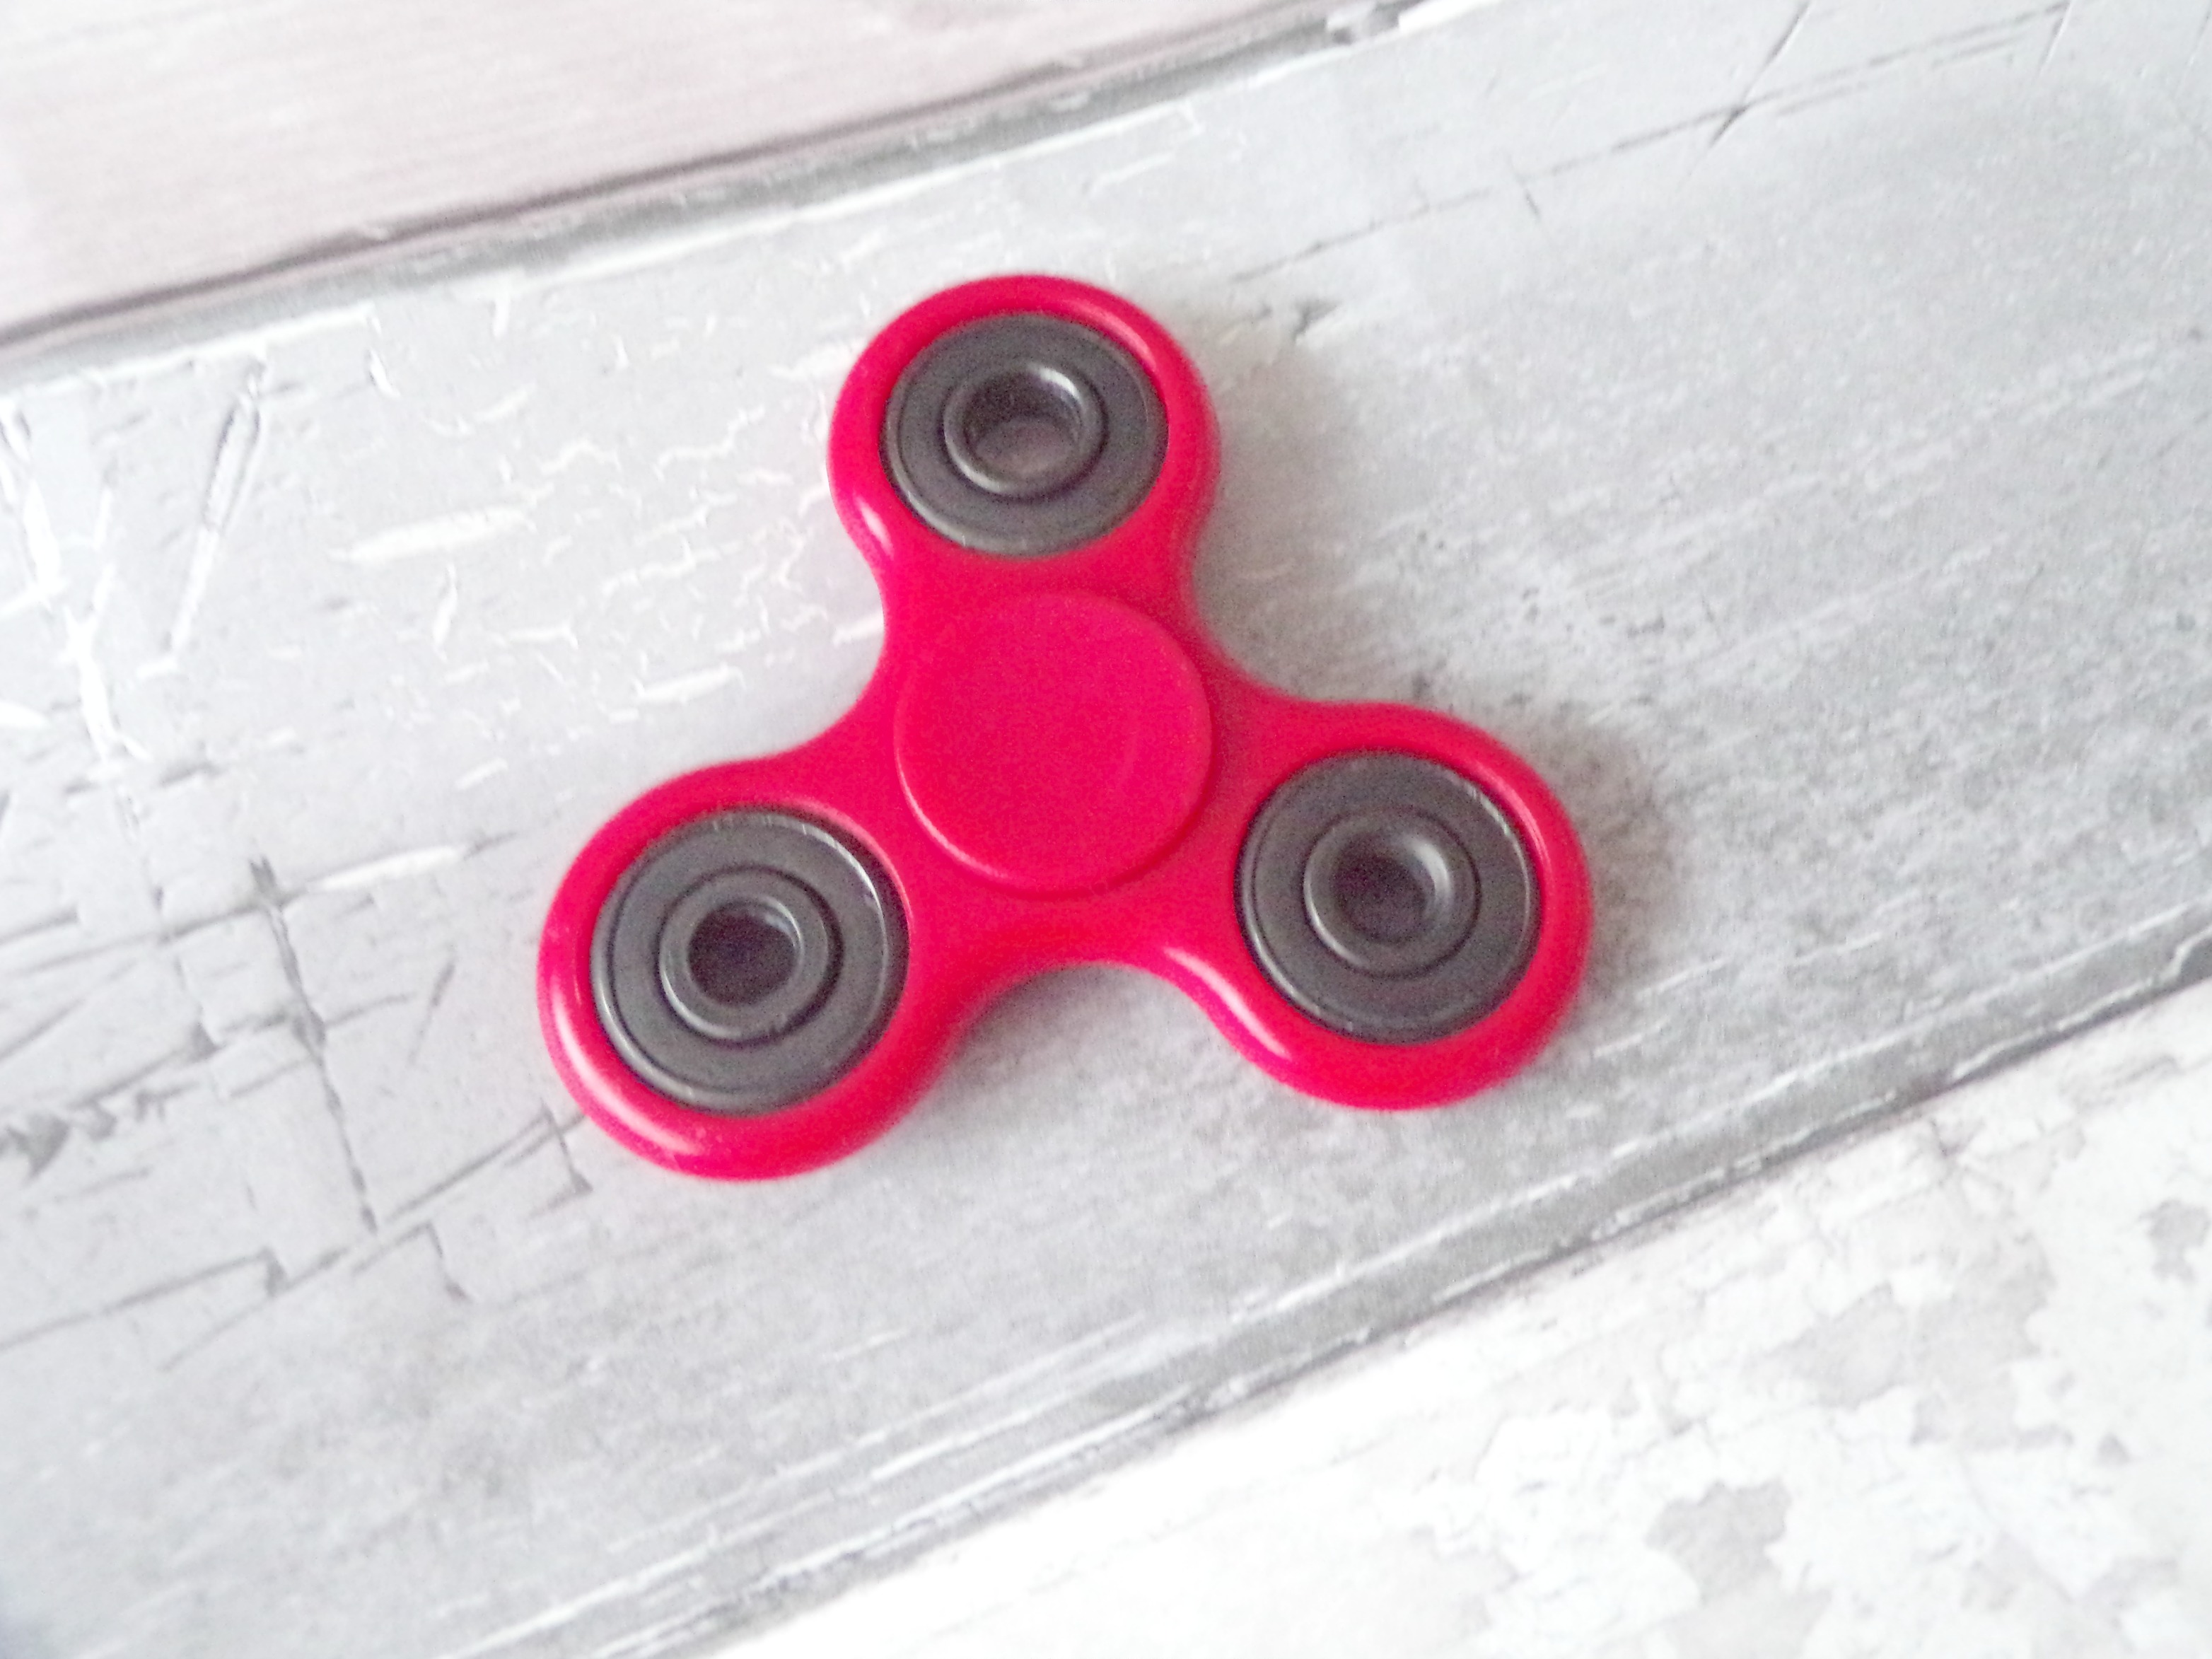 Have you given into the Fidget Spinners playground fad? Find out what mums think of them.